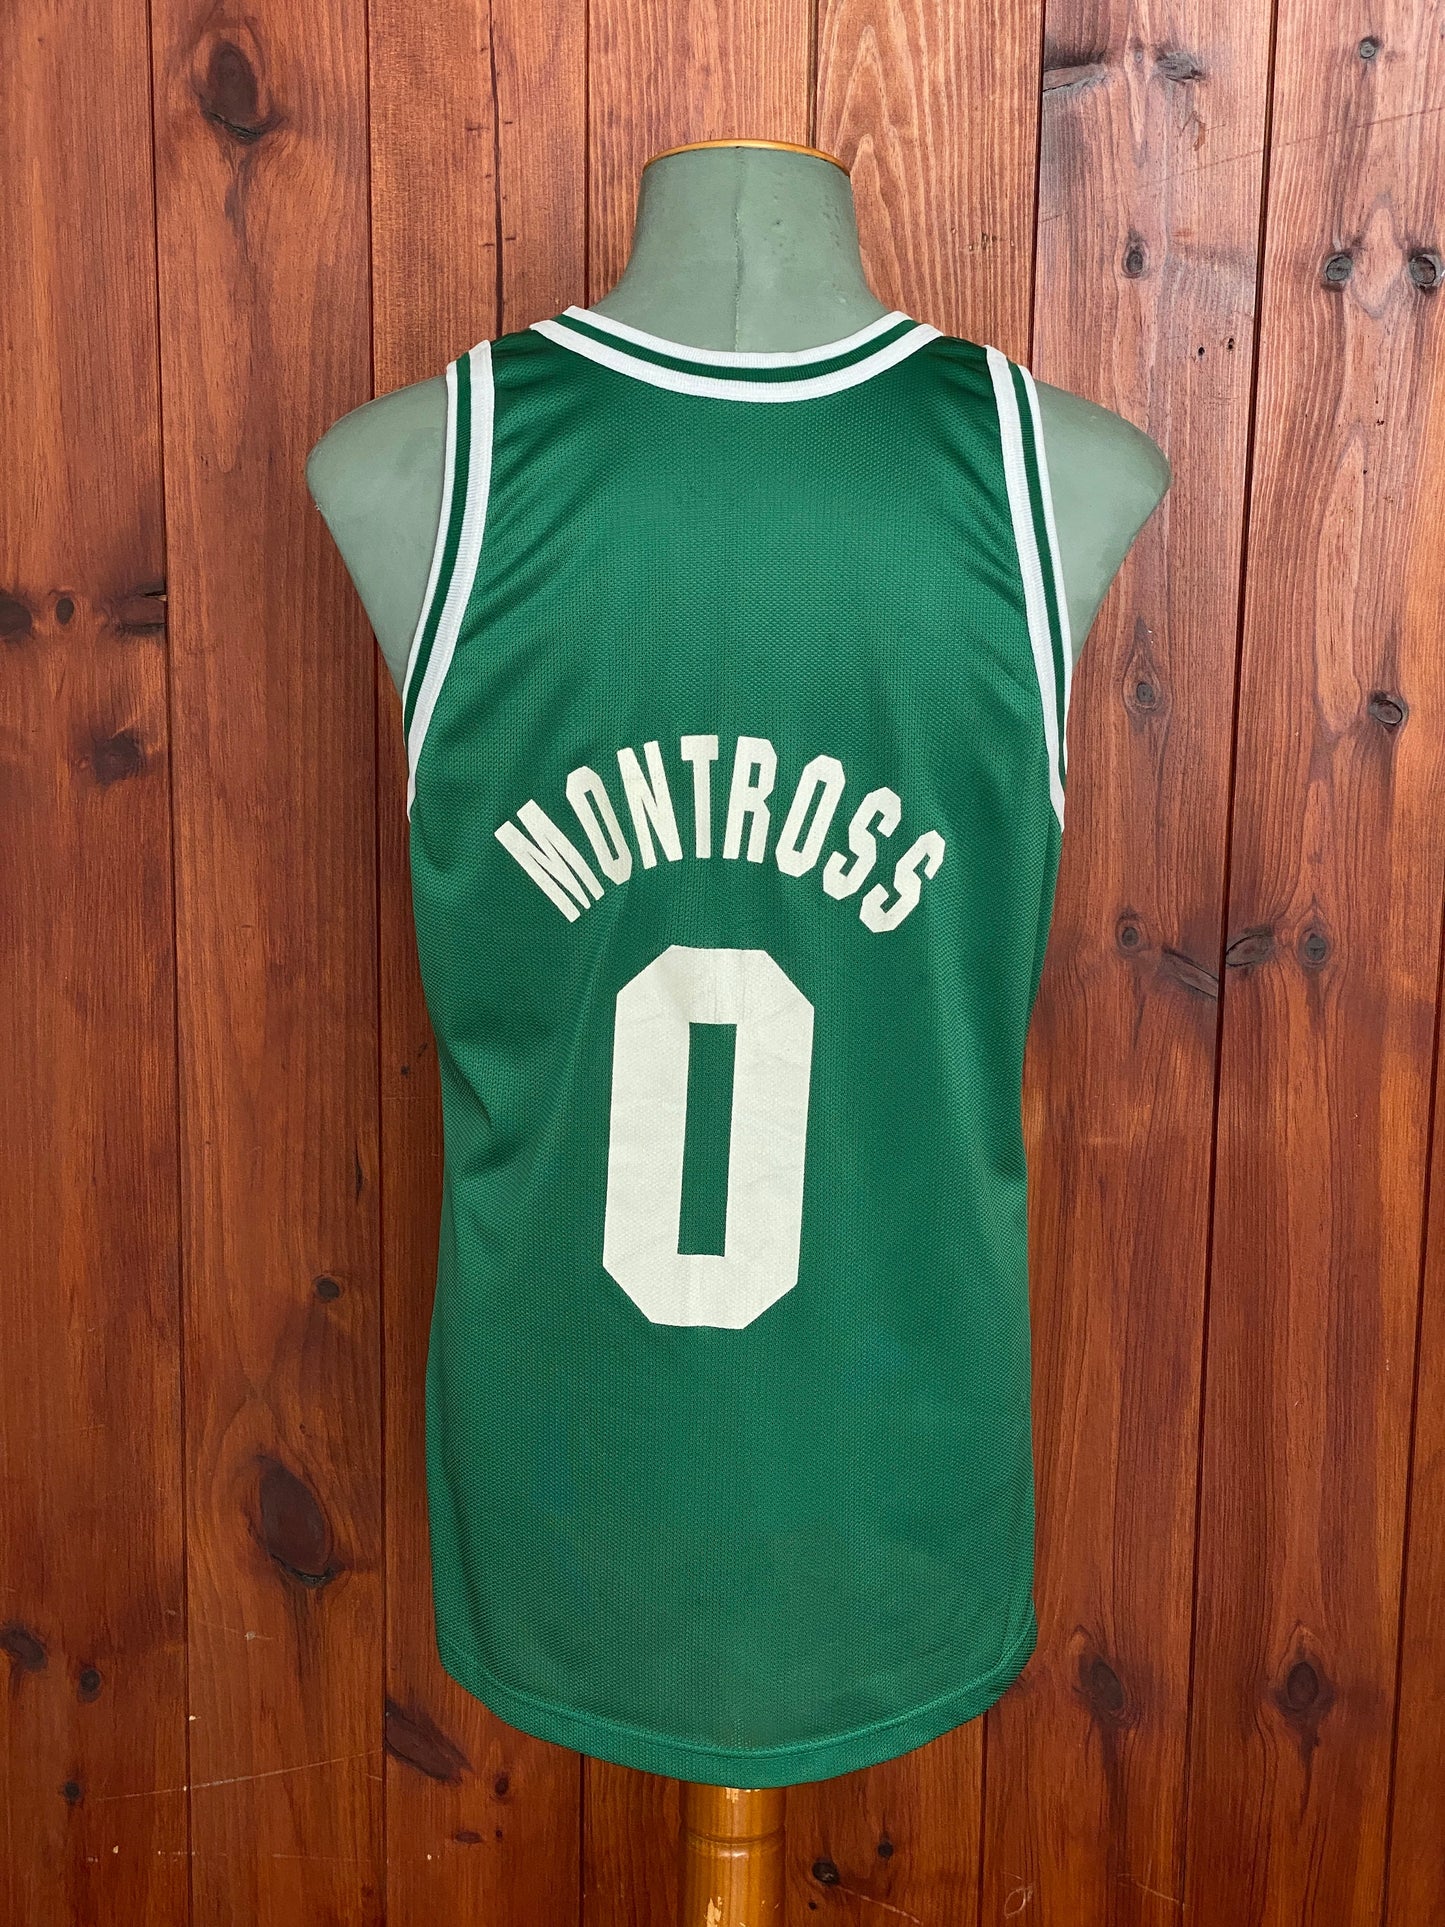 Authentic Size 44 Eric Montross #0 Celtics Vintage 90s Jersey | Made in USA by Champion